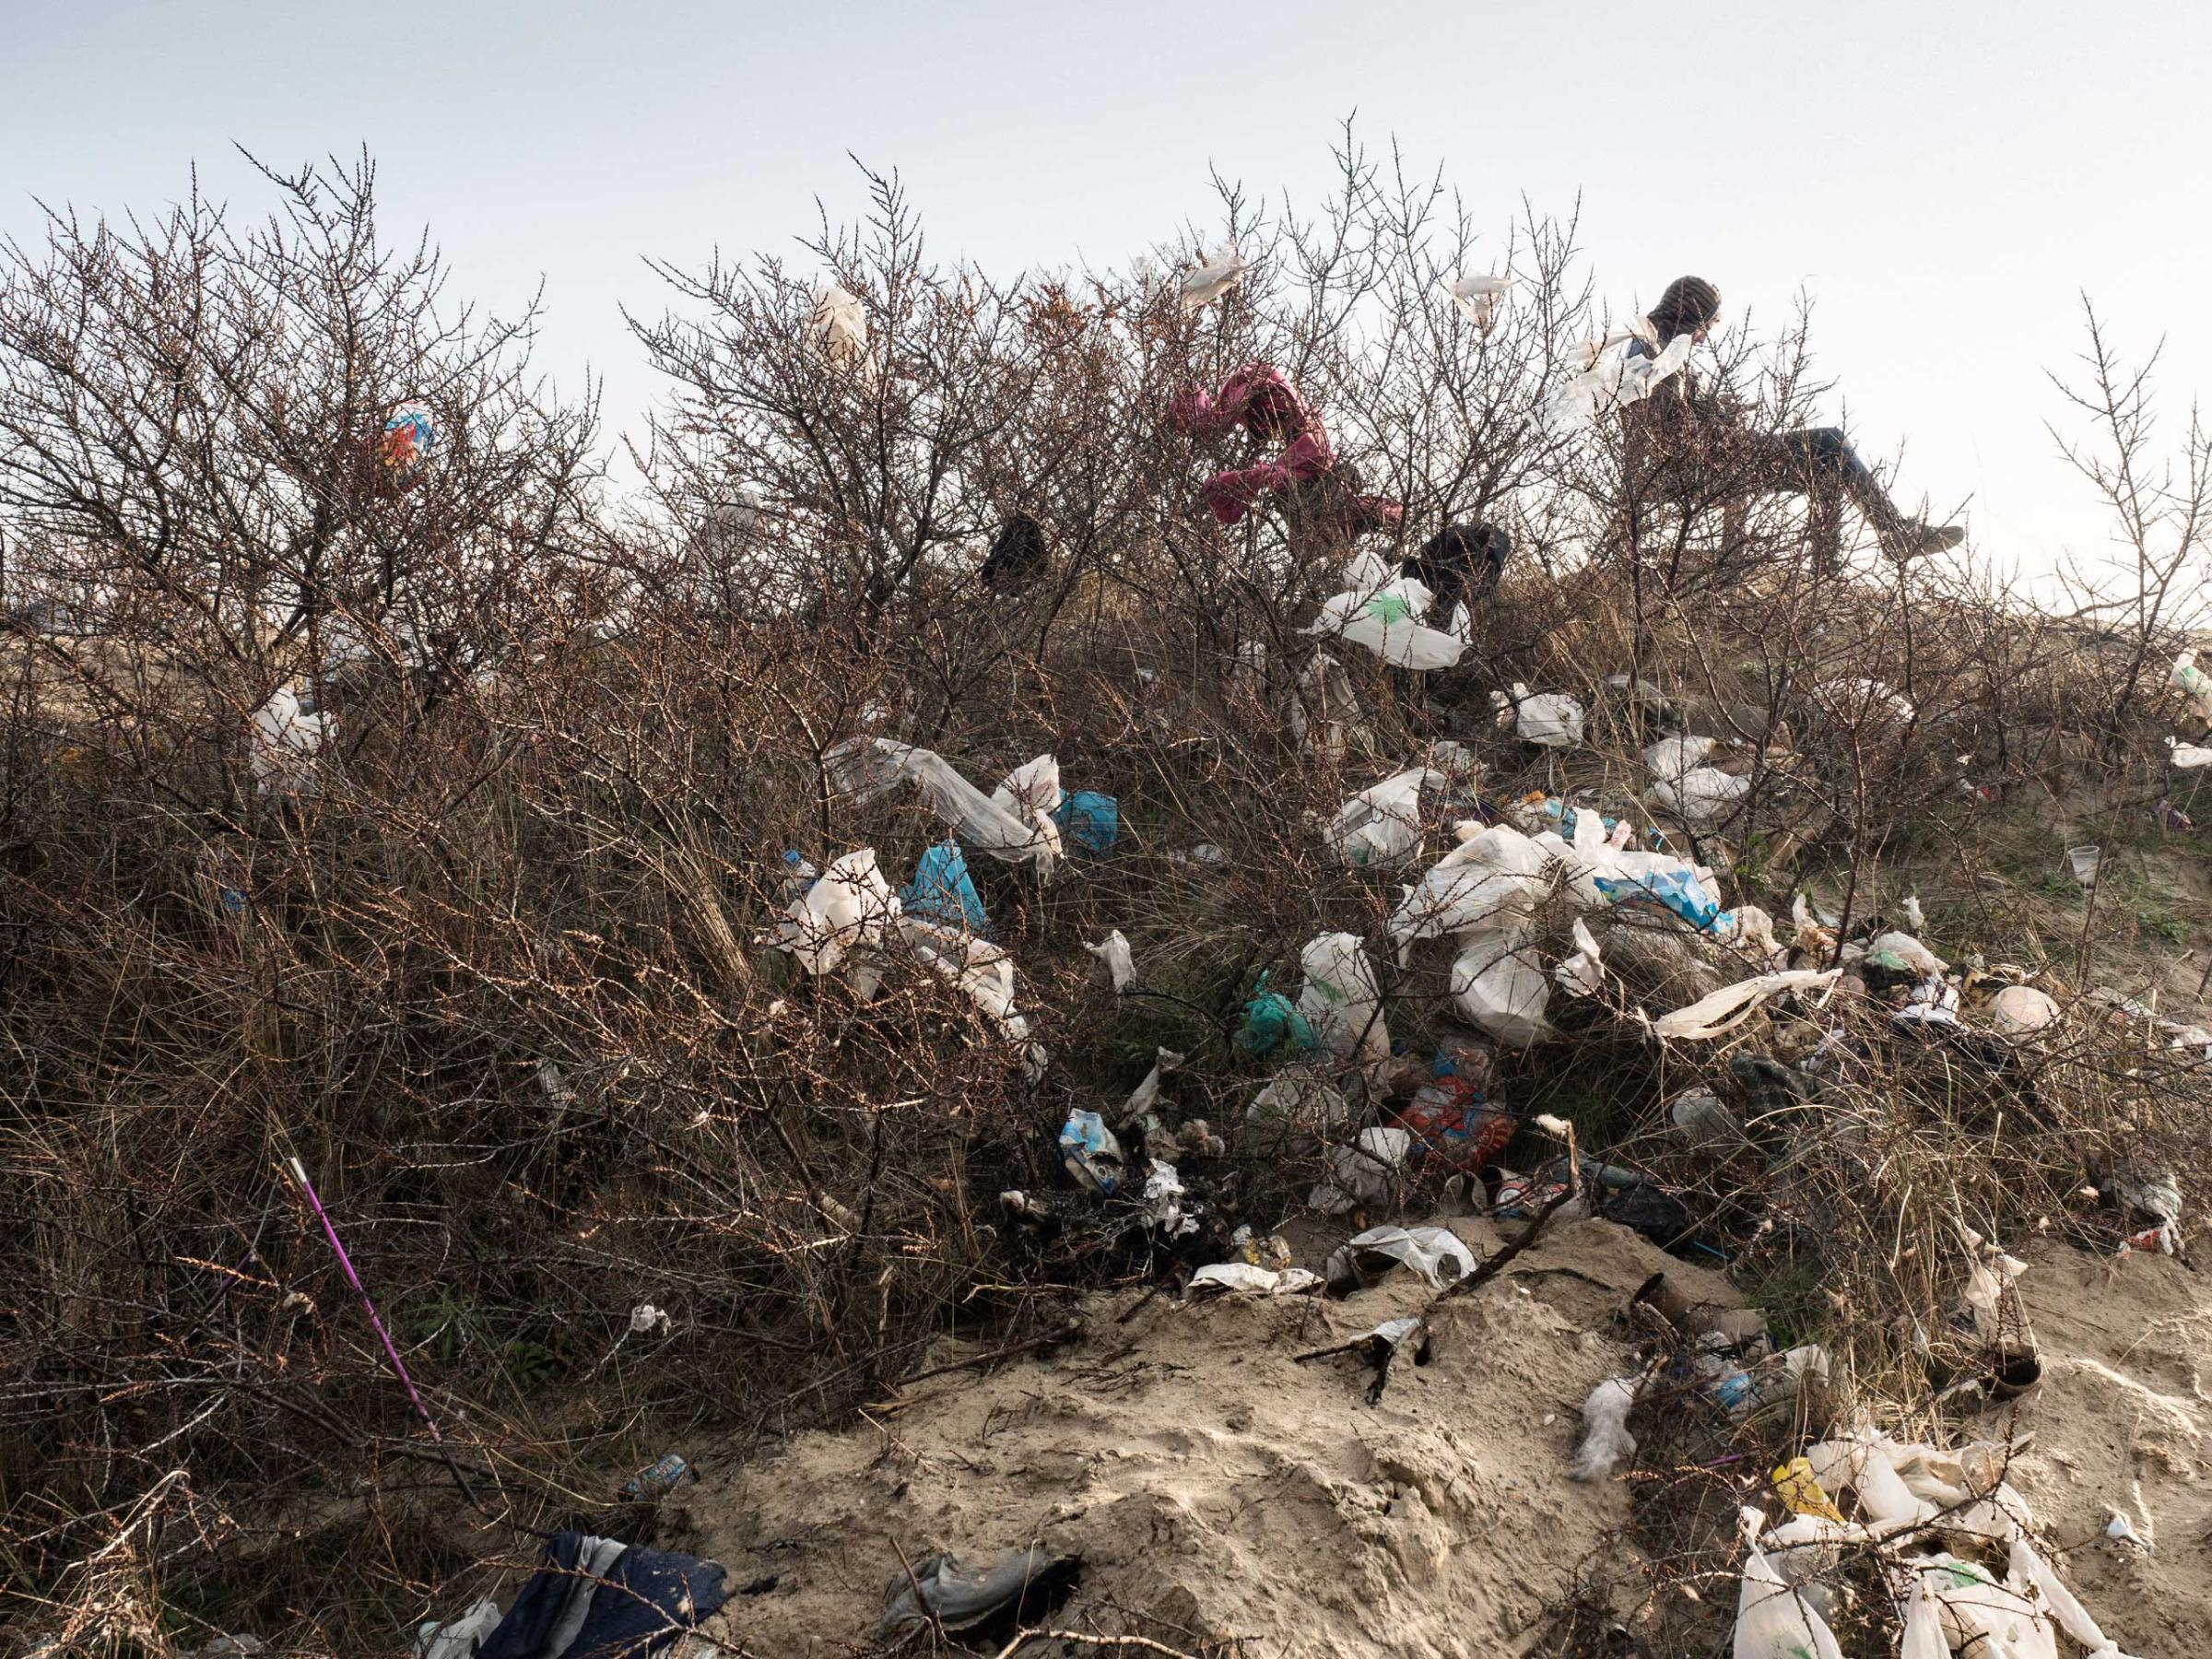 Trash collects on trees in the "jungle" of Calais, France, Jan. 20, 2016.